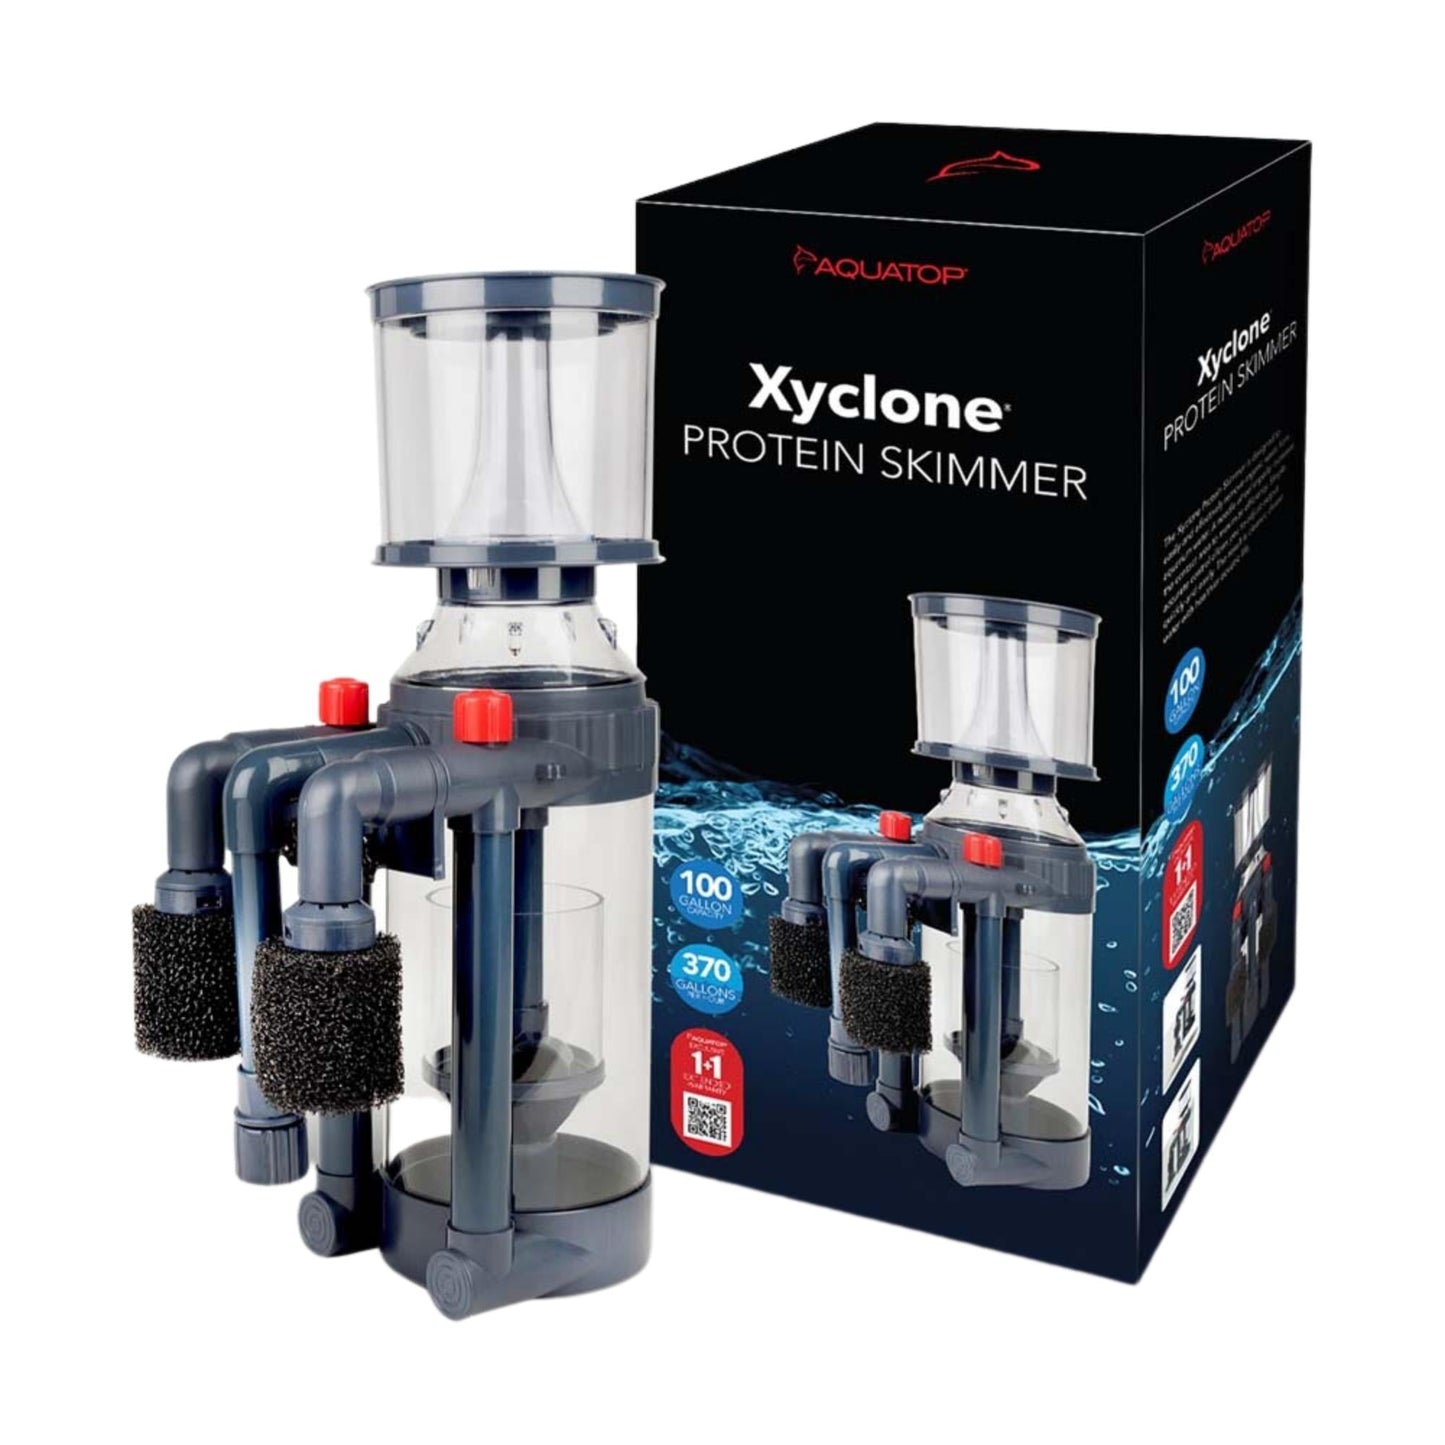 Aquatop Xyclone Protein Skimmer with Pump 1ea/Up To 100 gal